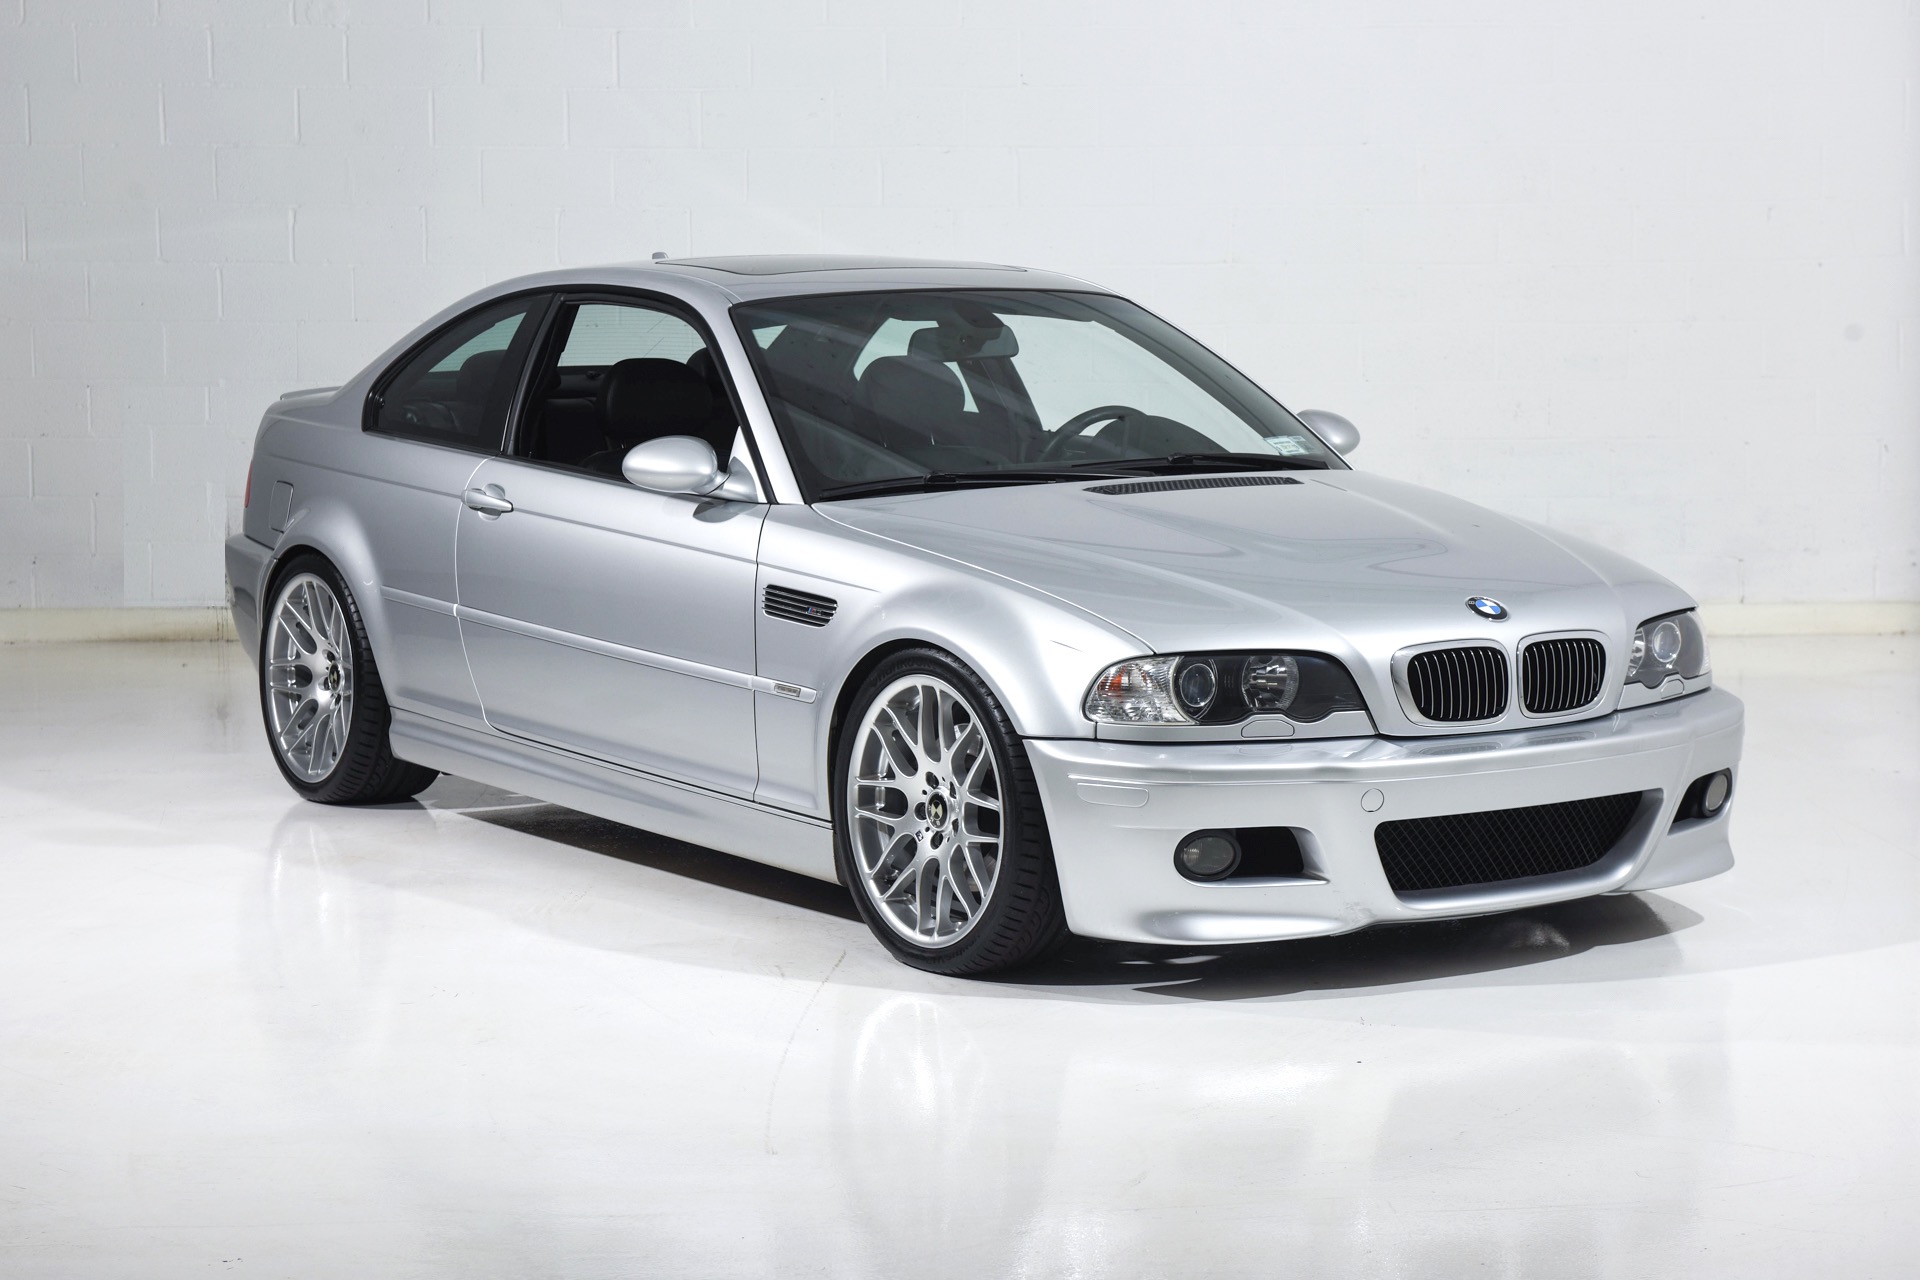 Used 2004 BMW M3 For Sale 22 900 Motorcar Classics Stock 1321